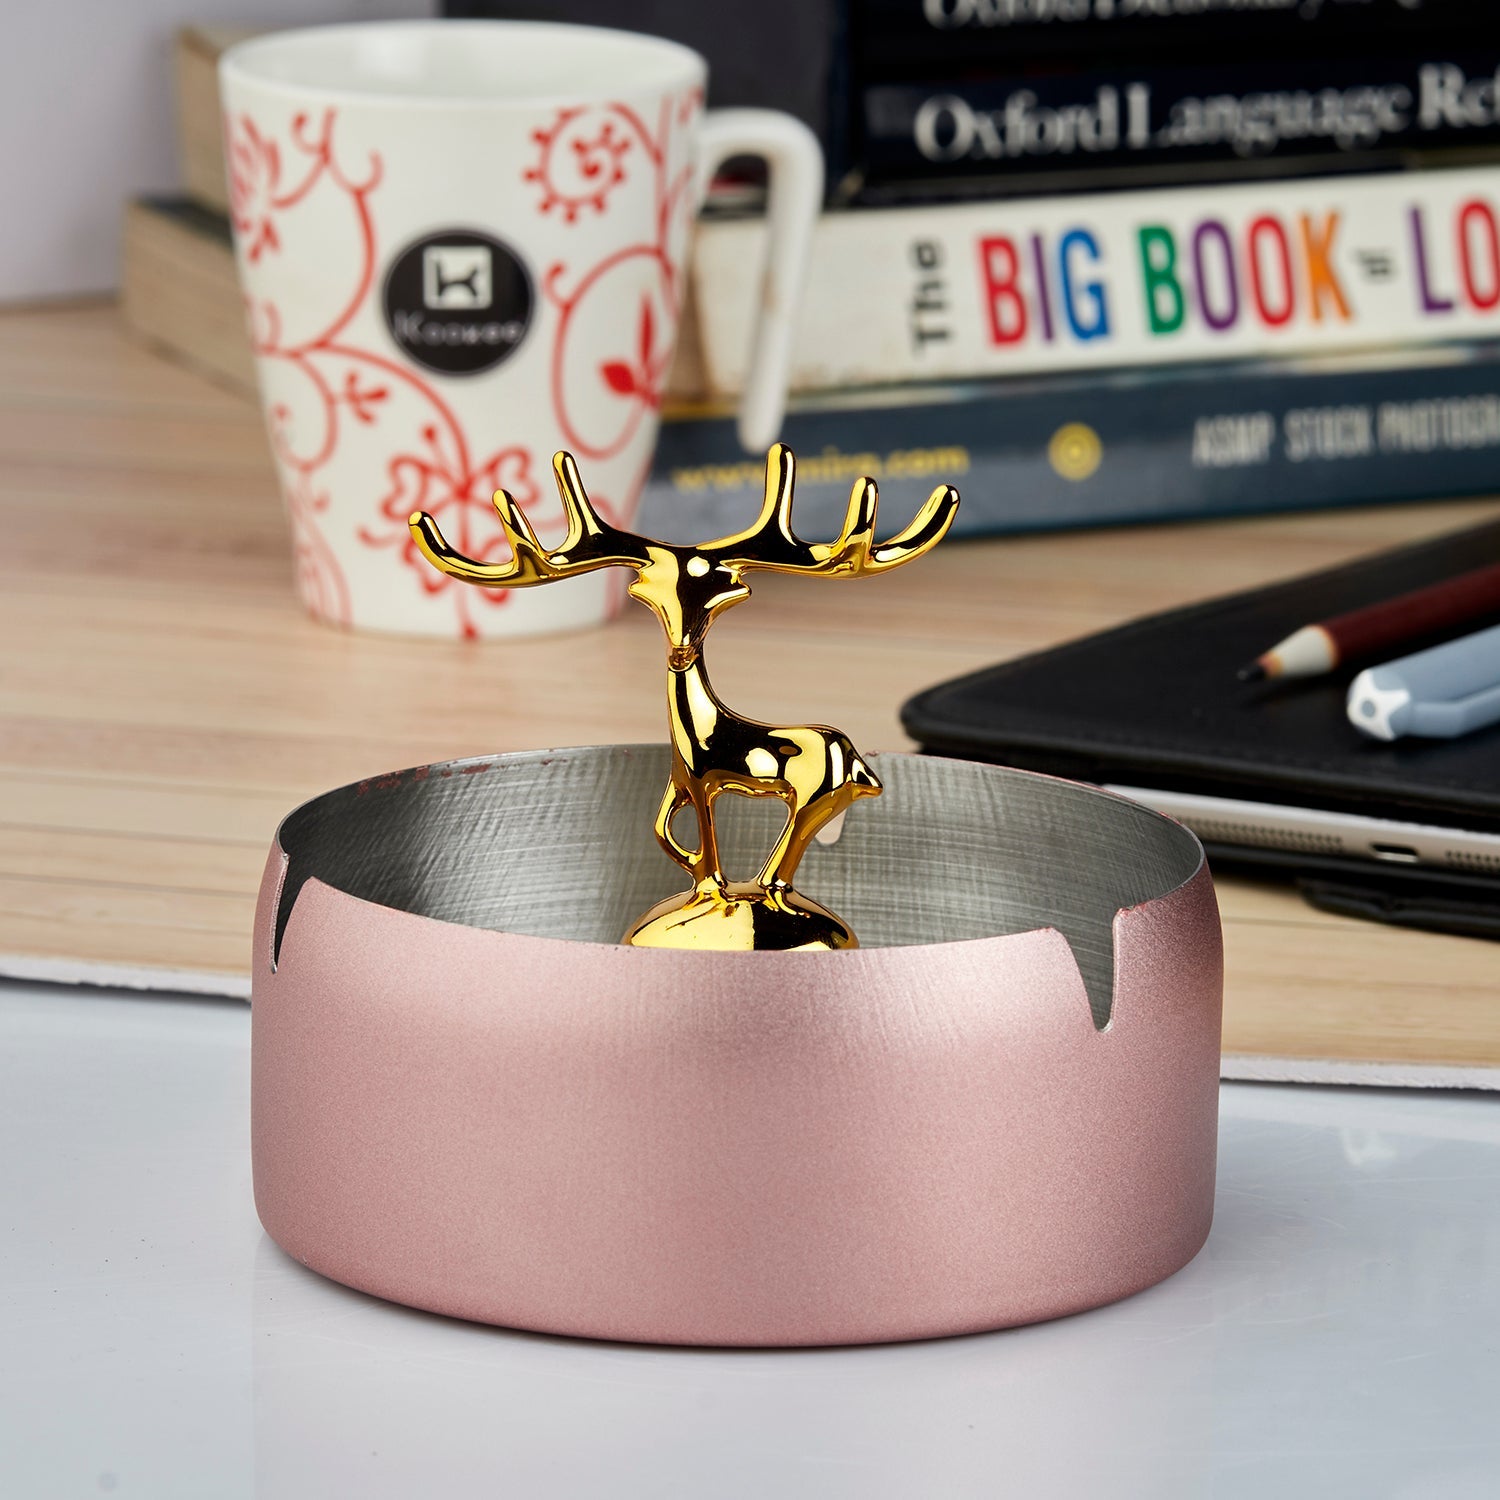 Ashtray,Moose Ashtray, Stainless Steel Home Ash Tray Set for Cigarettes, Cool Ashtray for Outside and Indoor Use, X-Large â€“ Pink